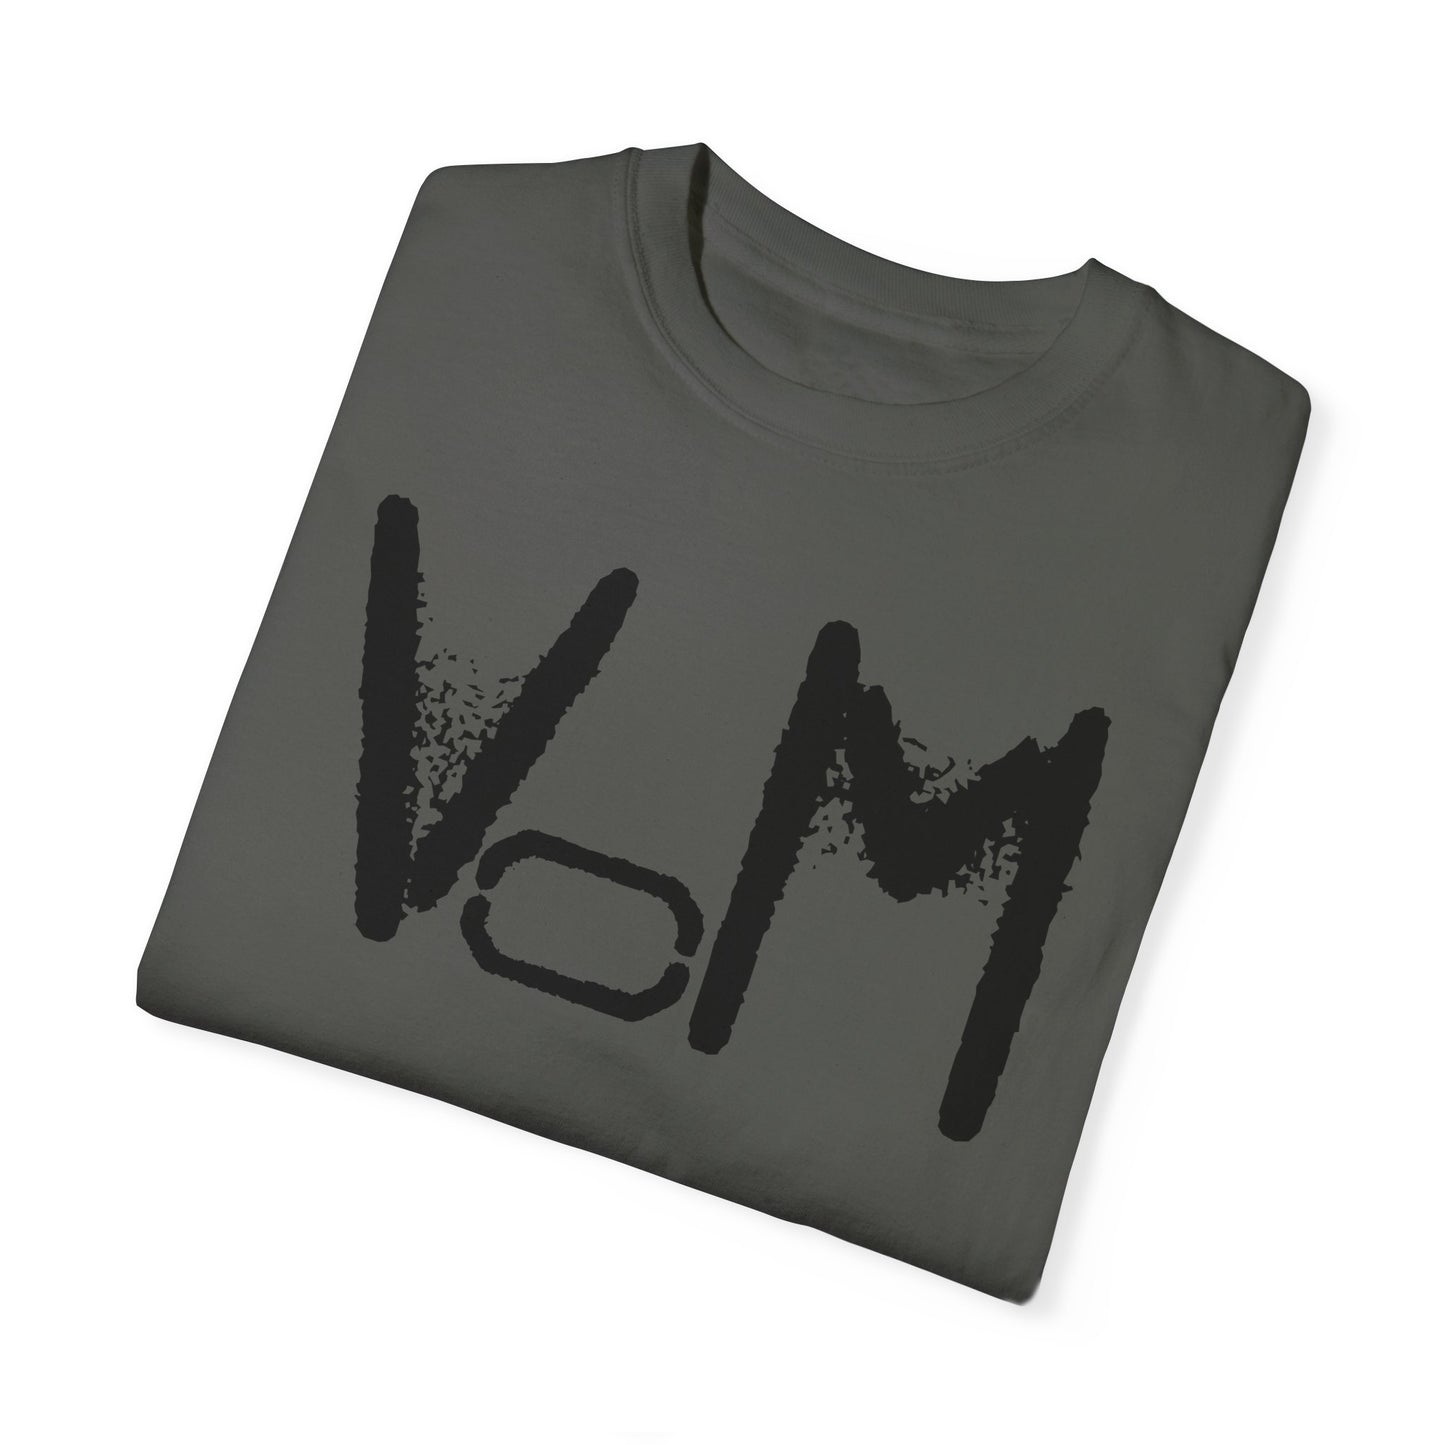 Unisex Comfort Colors T-shirt | Villagers of Mainstrasse VOM Octin Clean